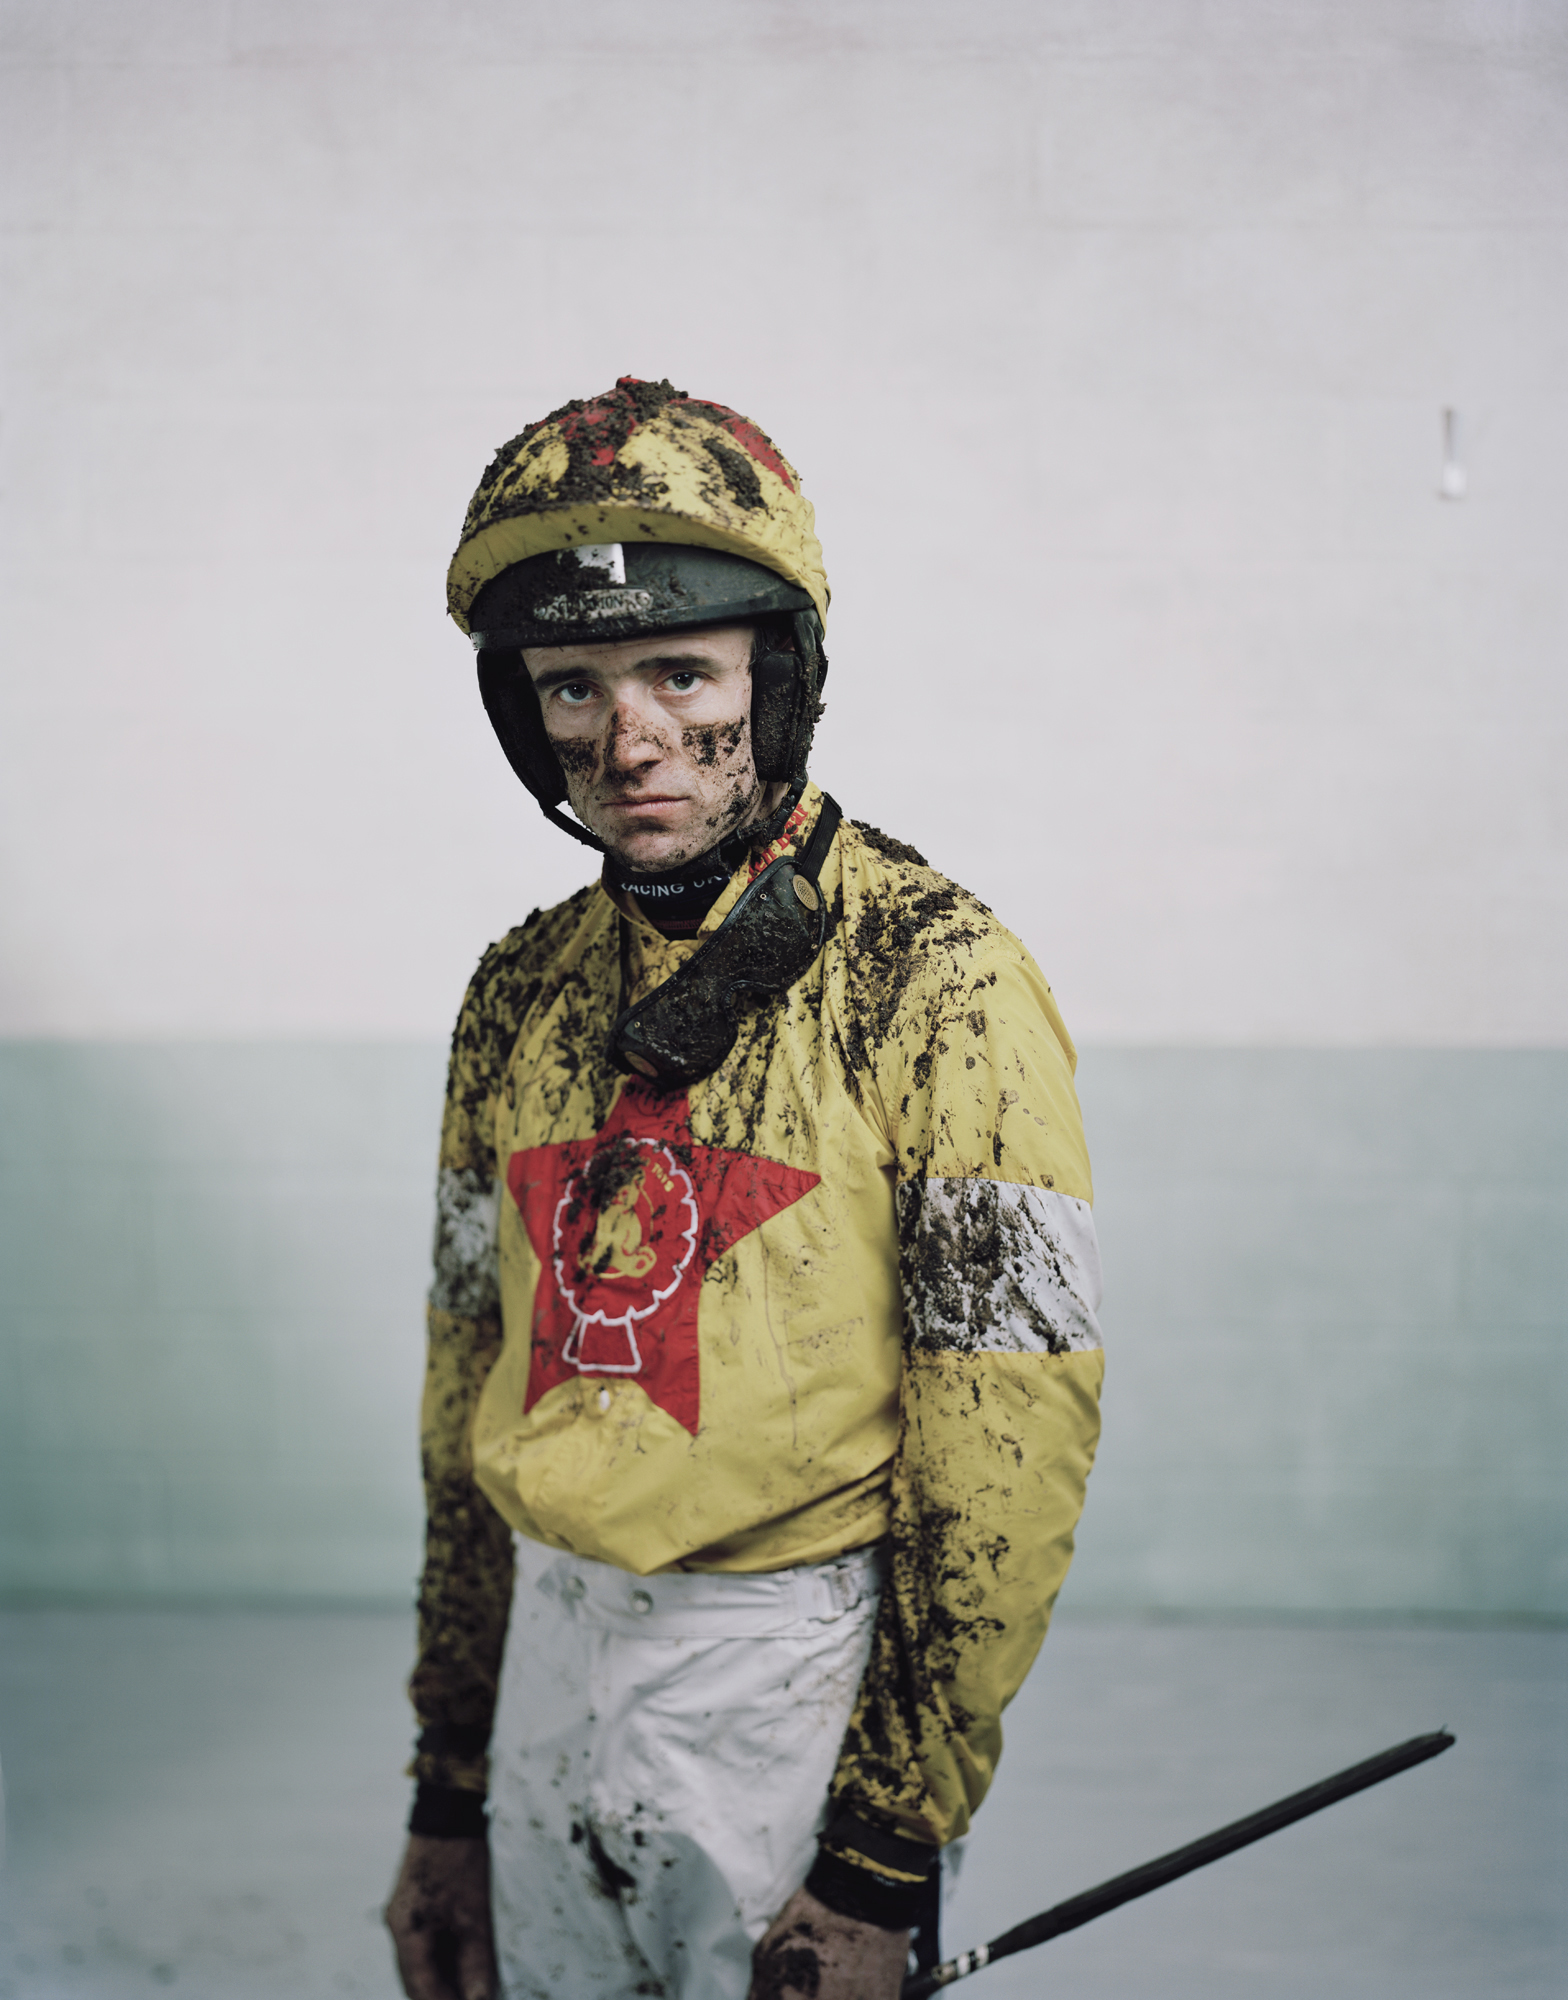 Nominated in the Campaign category. A shot of Irish jockey Ruby Walsh.